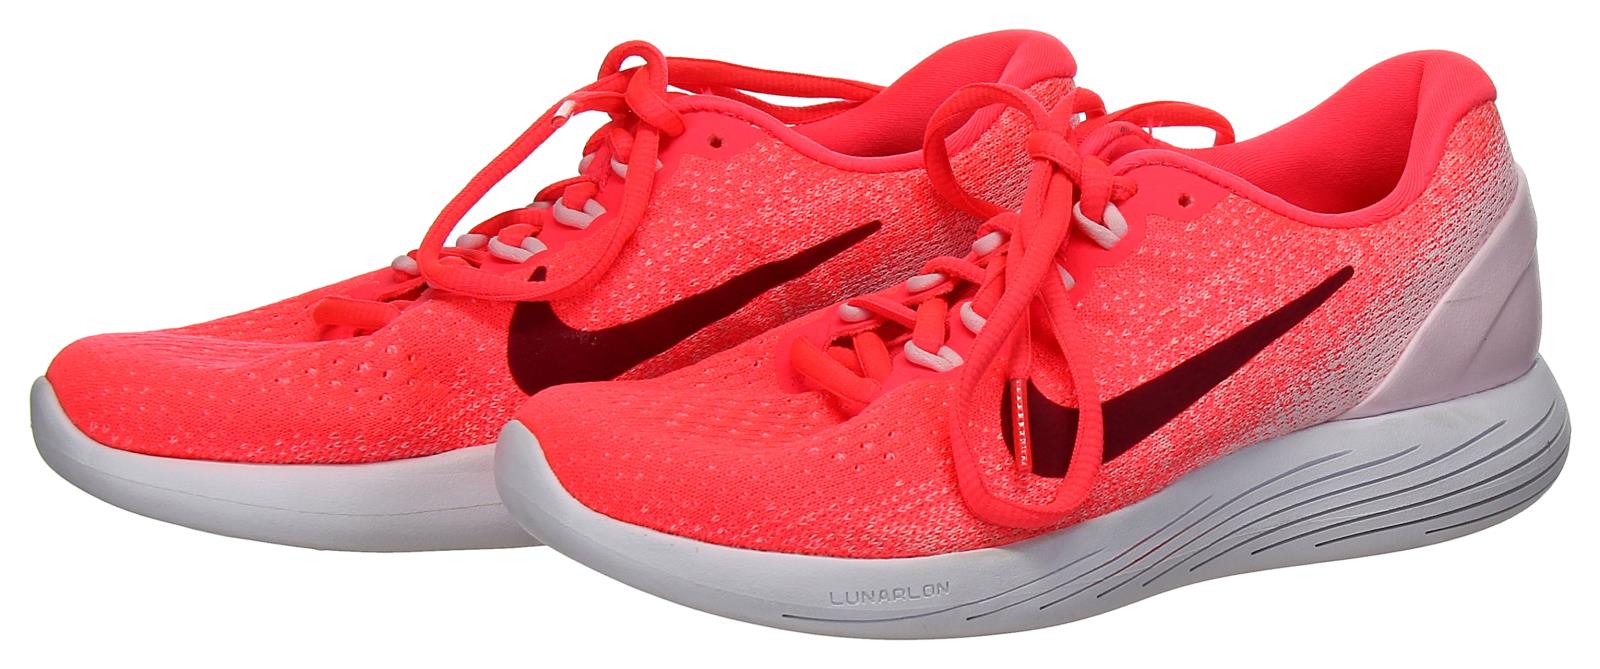 nike lunarglide trainers